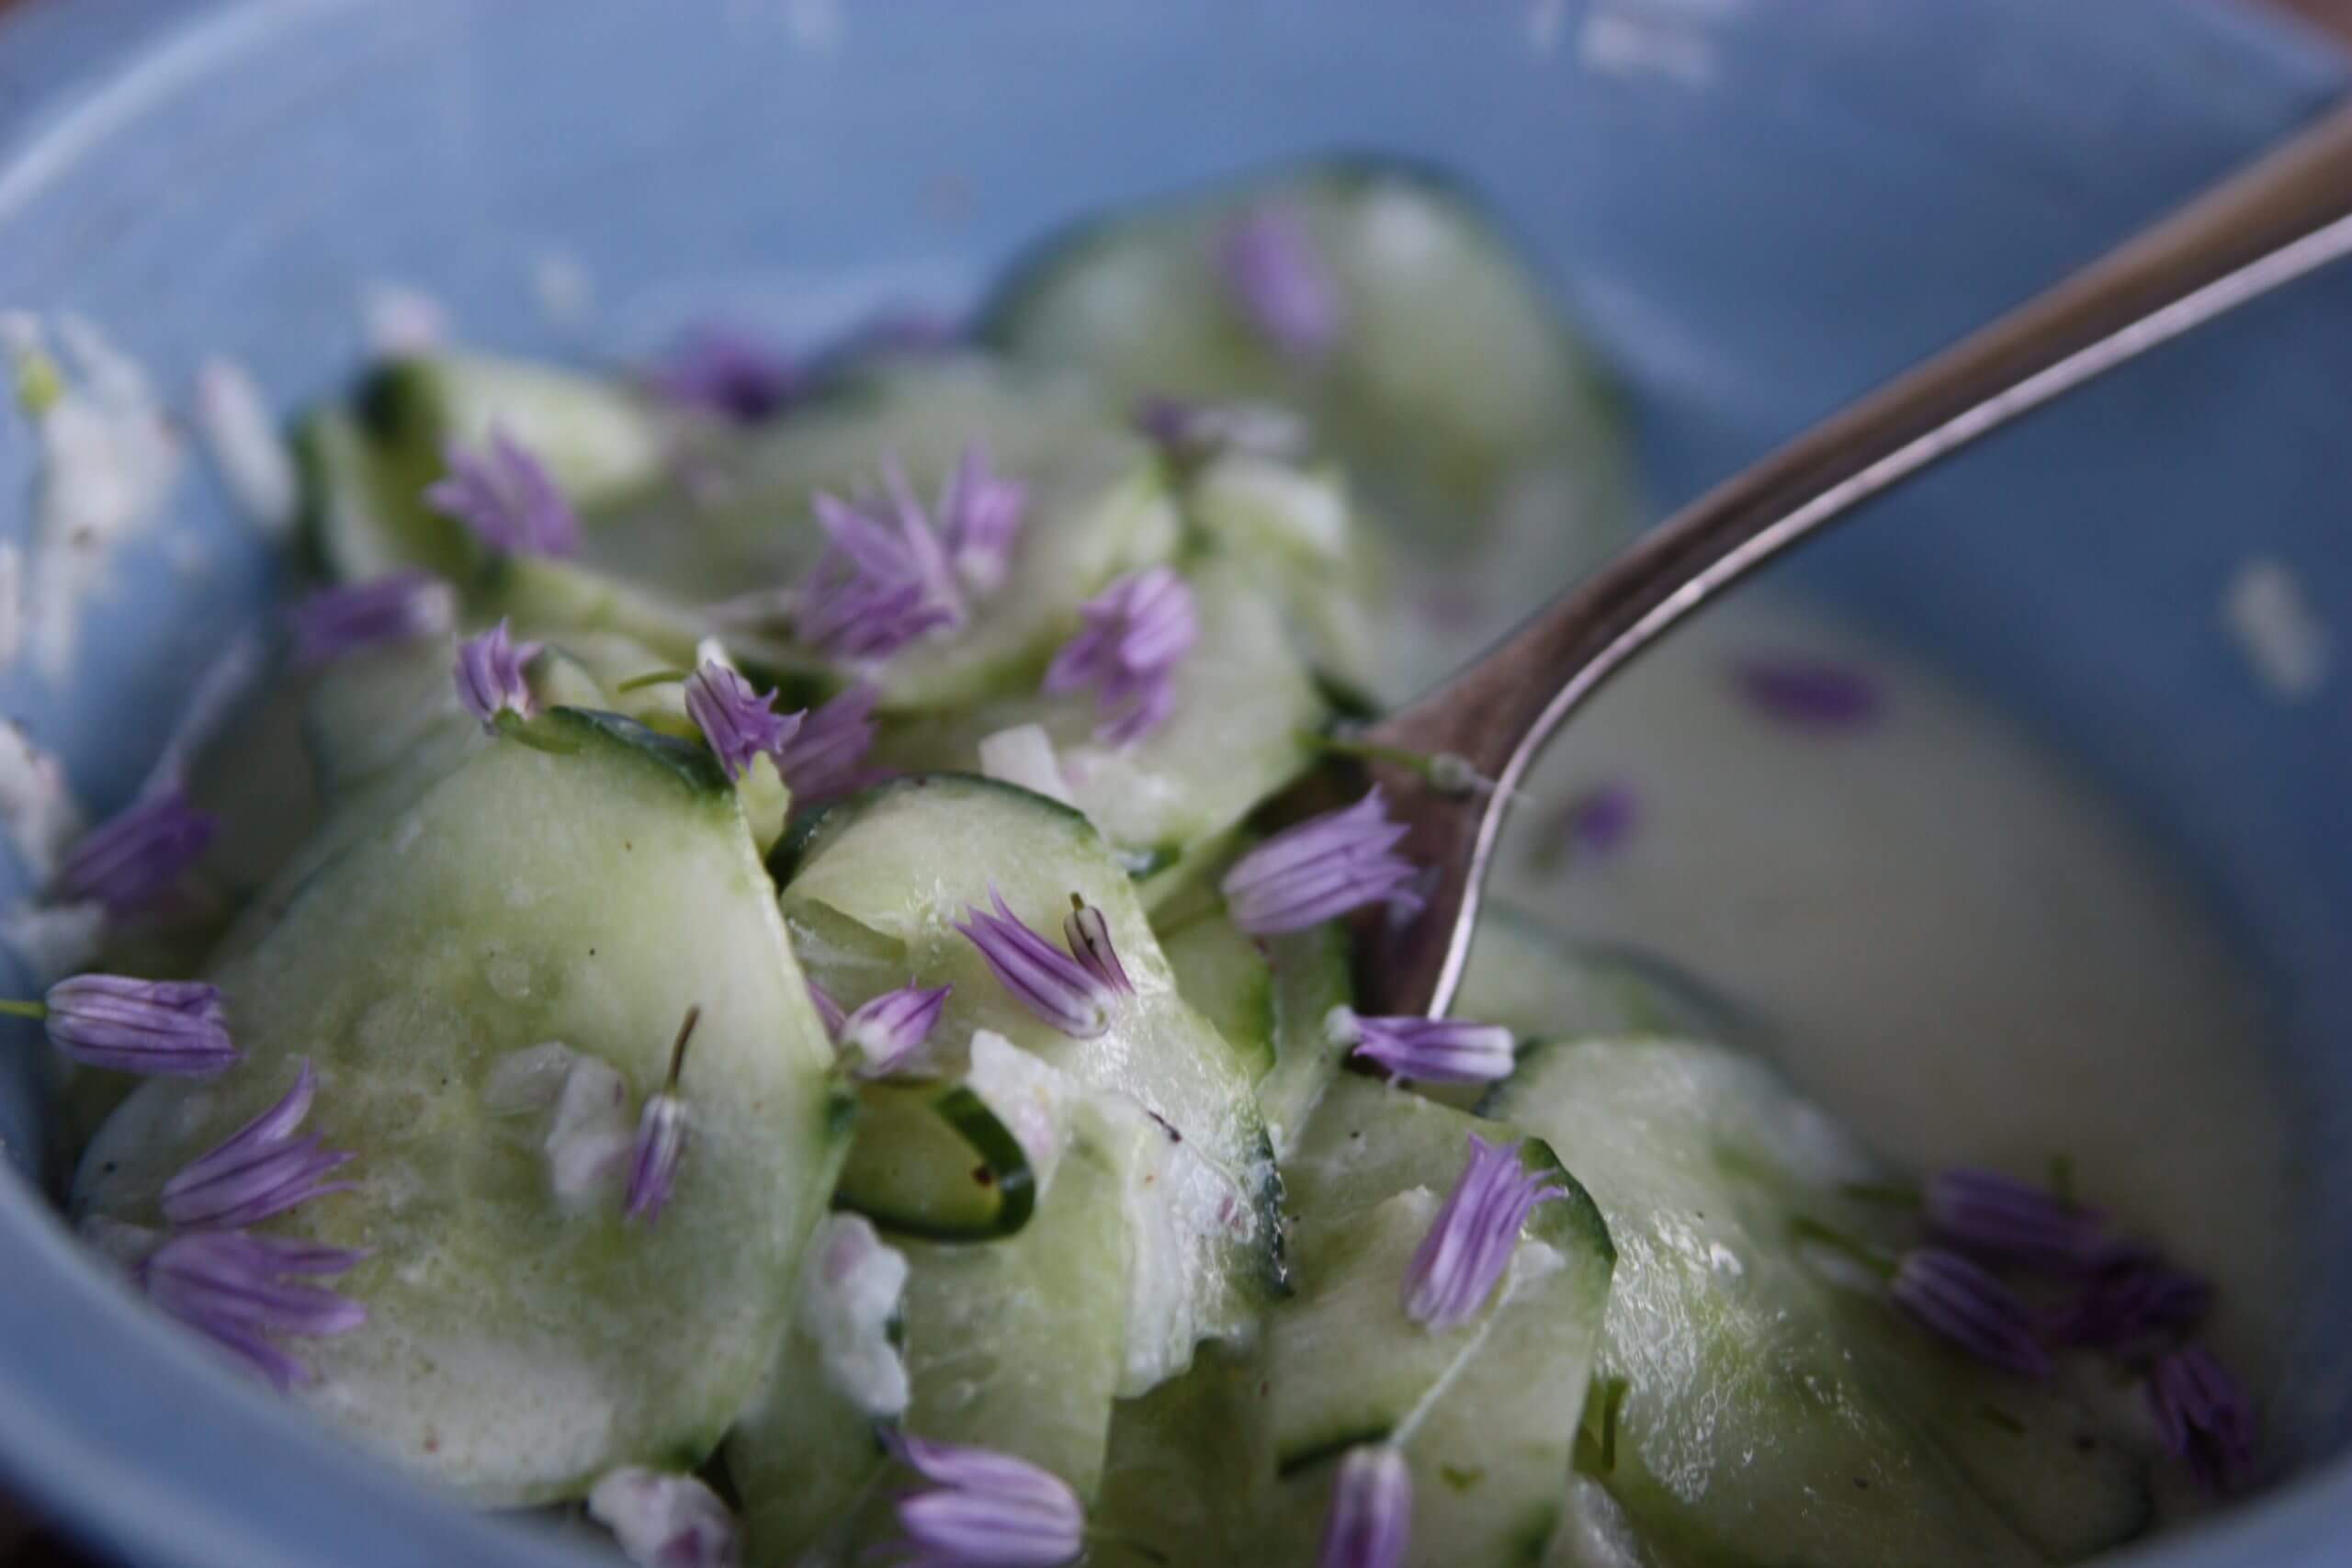 Pretty chive flowers and a sweet onion flavor to fresh cucumber salad.